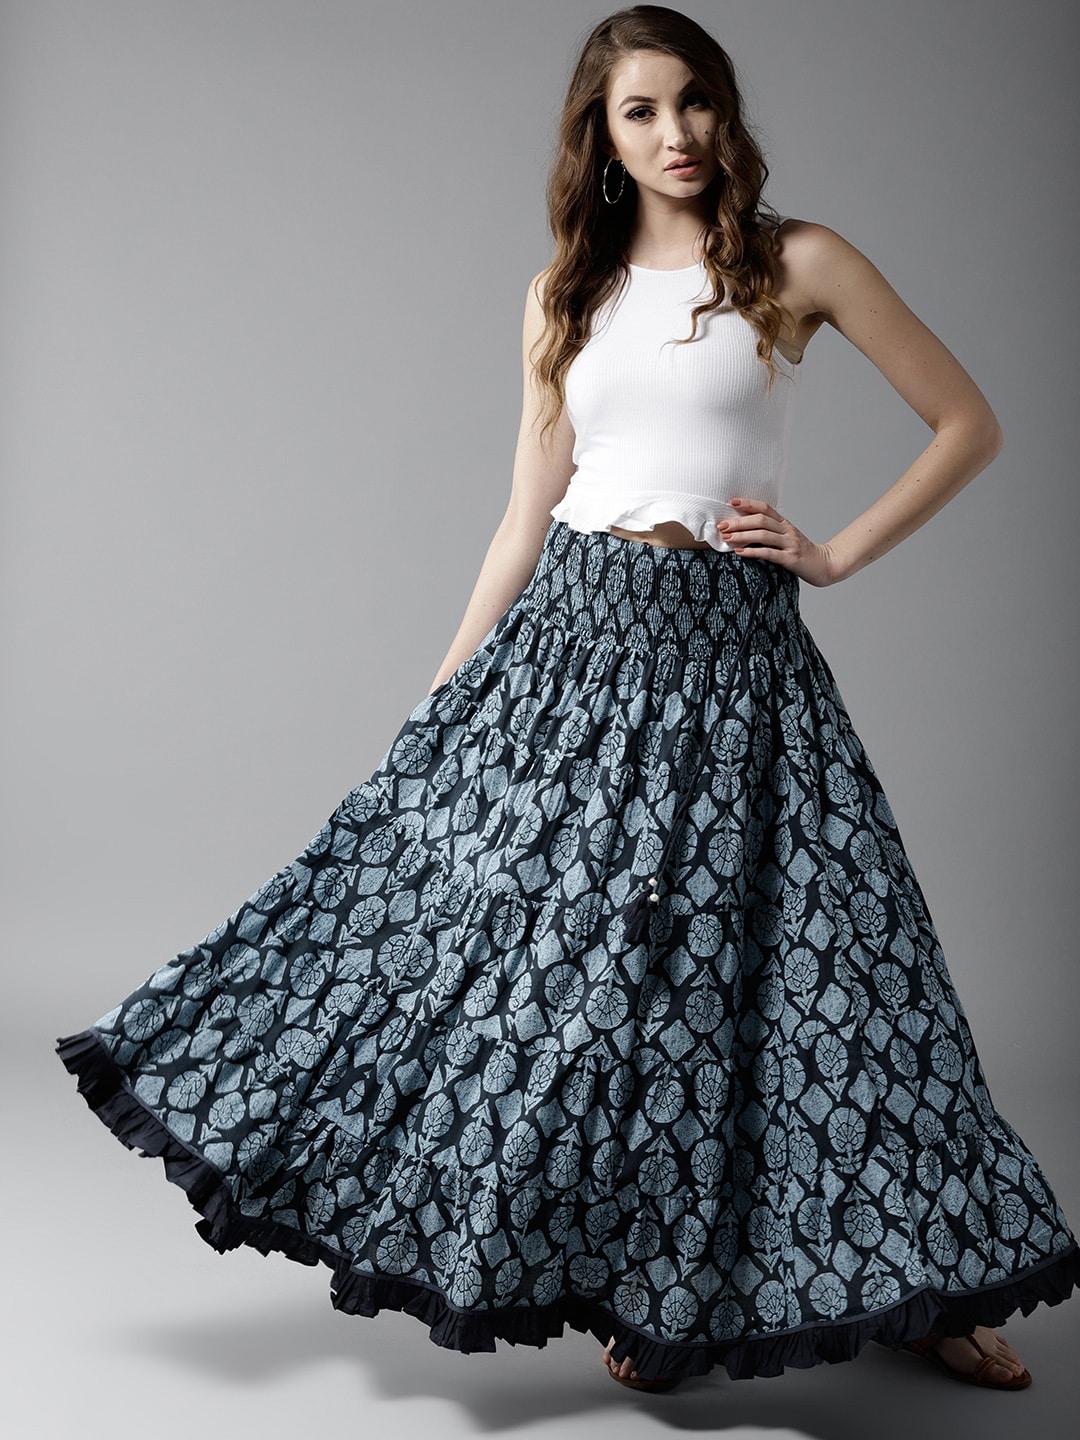 here&now blooming beauty tiered maxi pure cotton skirt